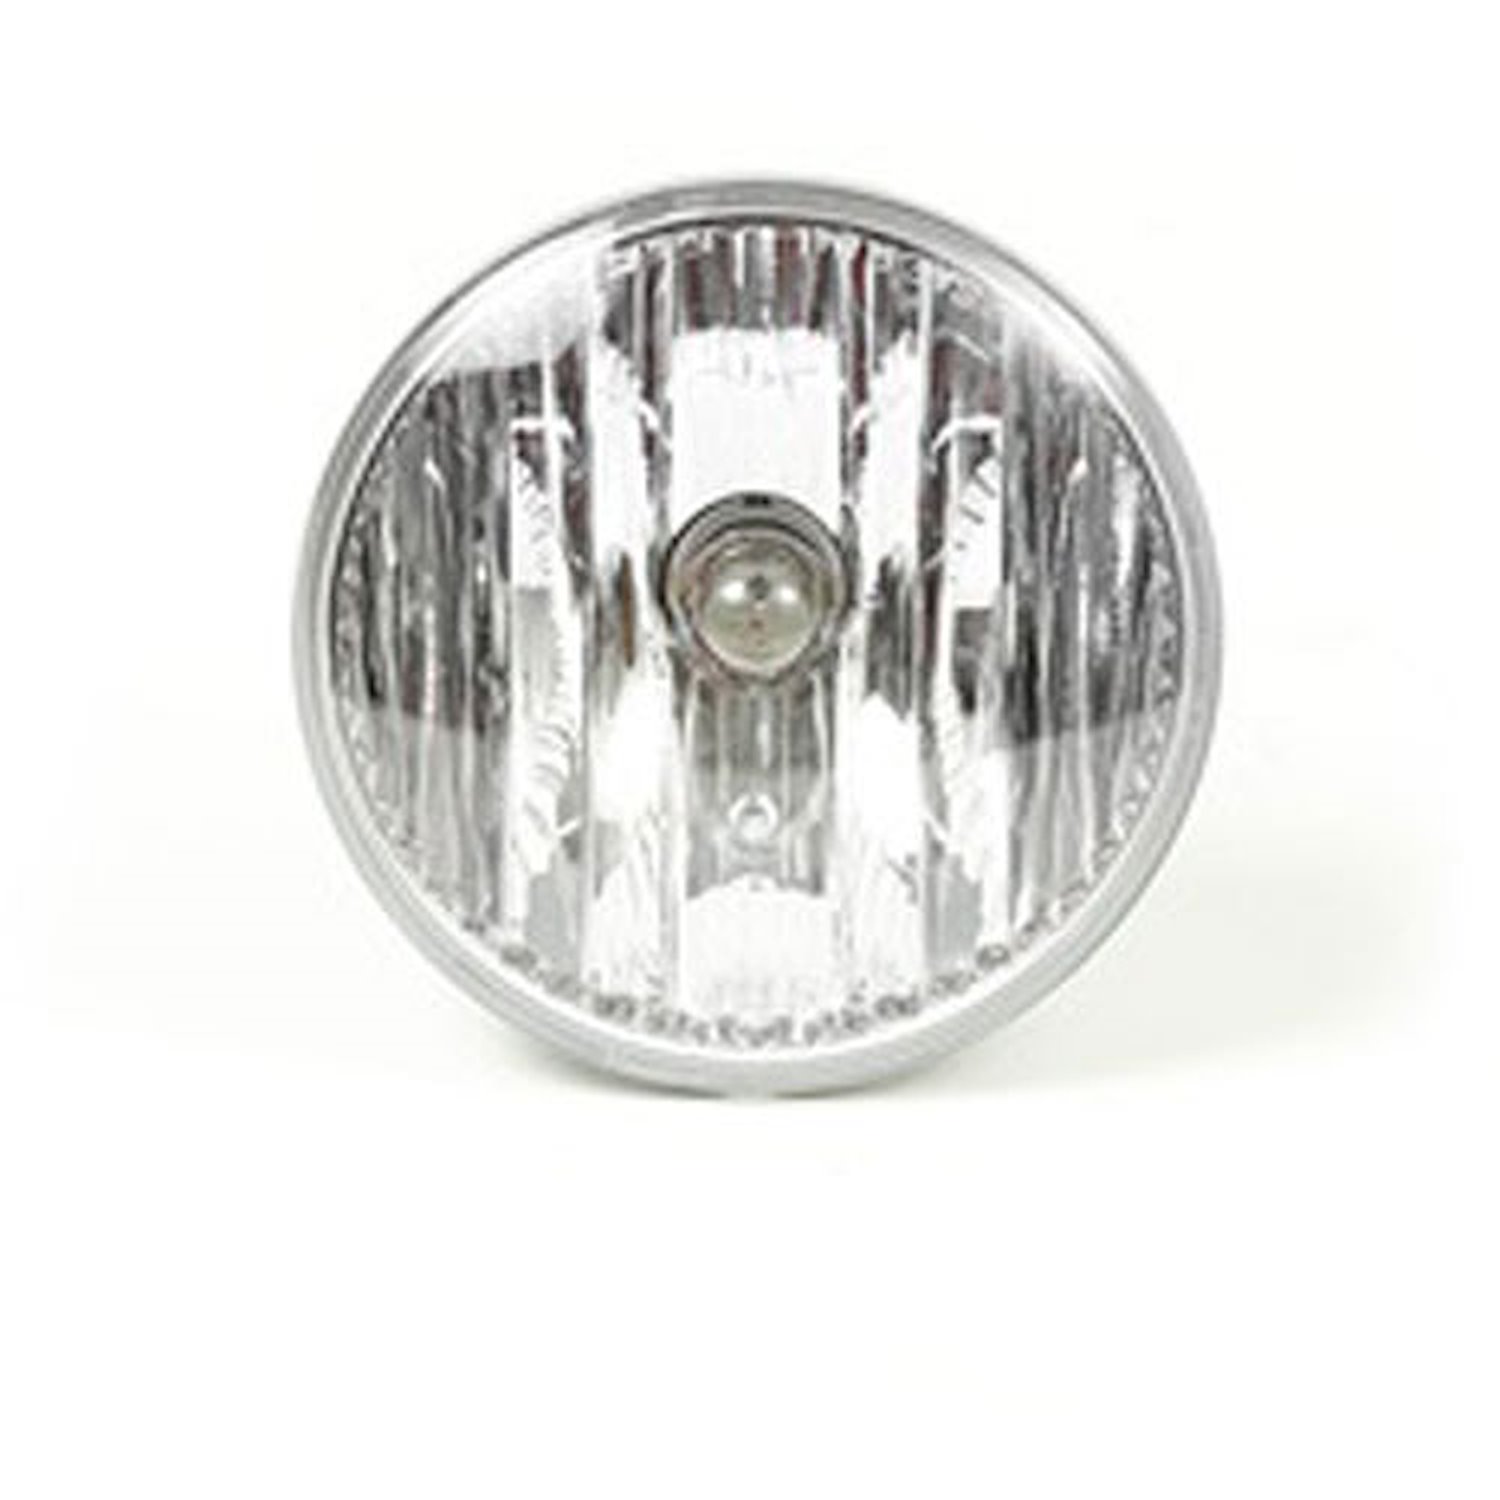 Replacement fog lamp from Omix-ADA, Fits11-15 Jeep Patriot and Compass models